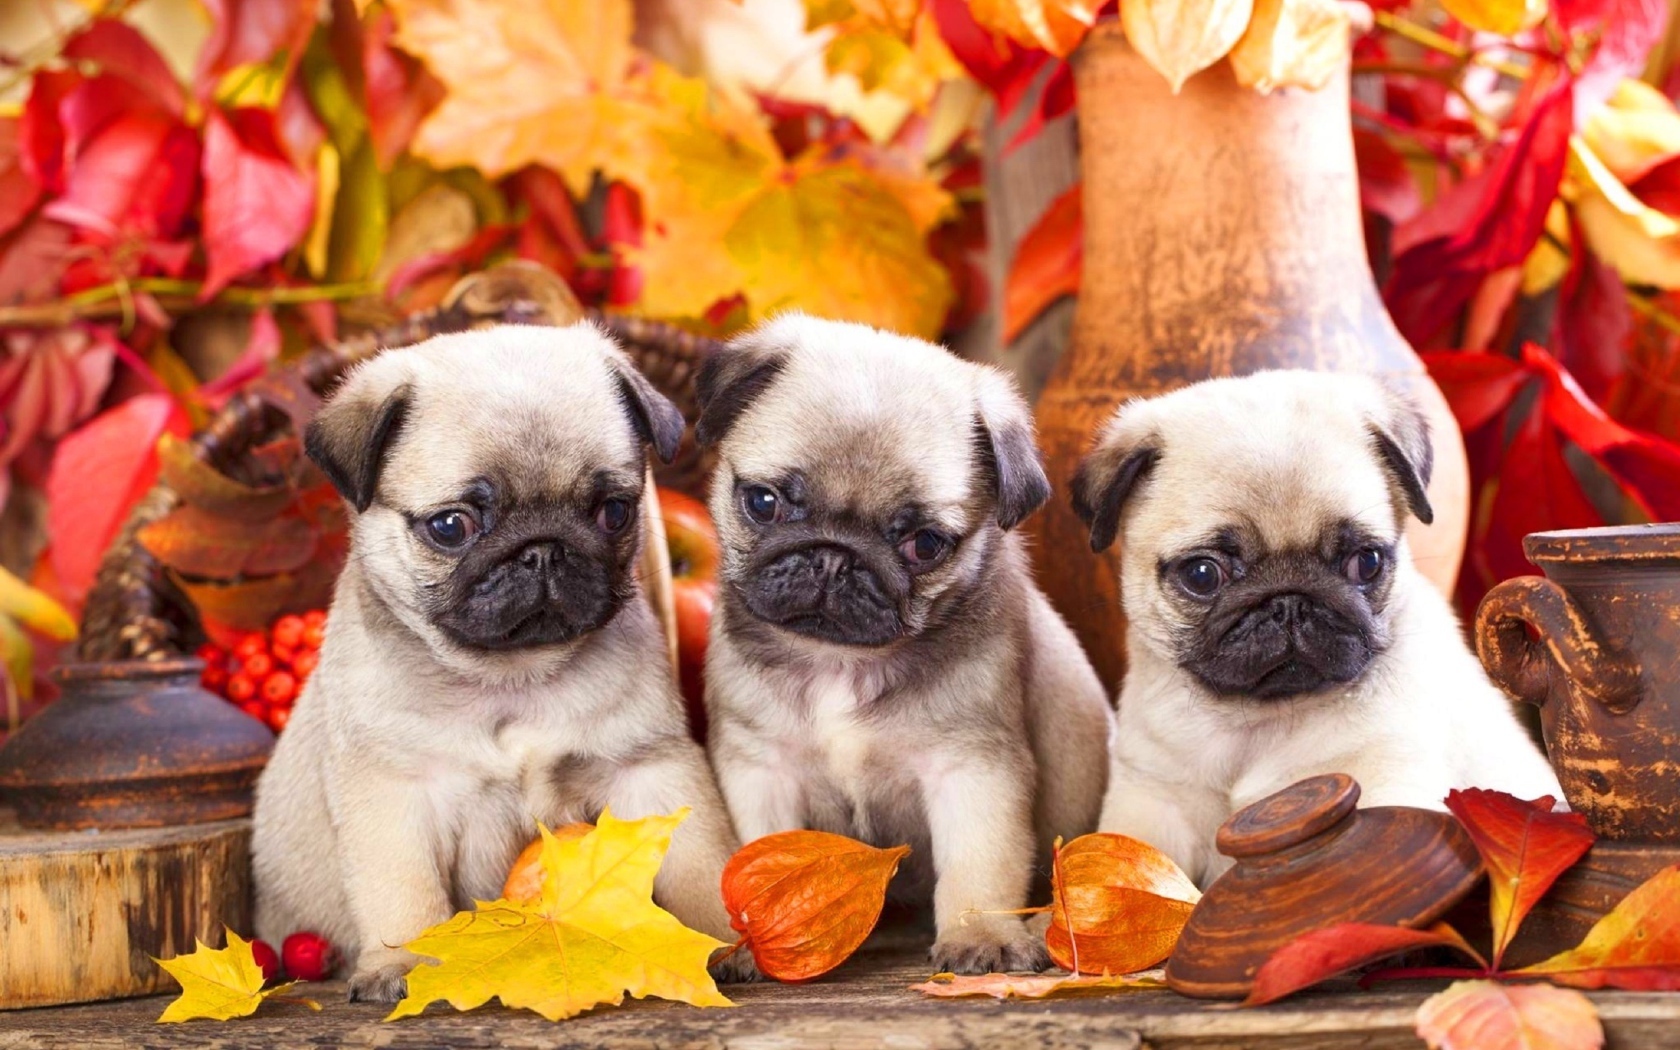 Three little pugs sit on the background of autumn leaves